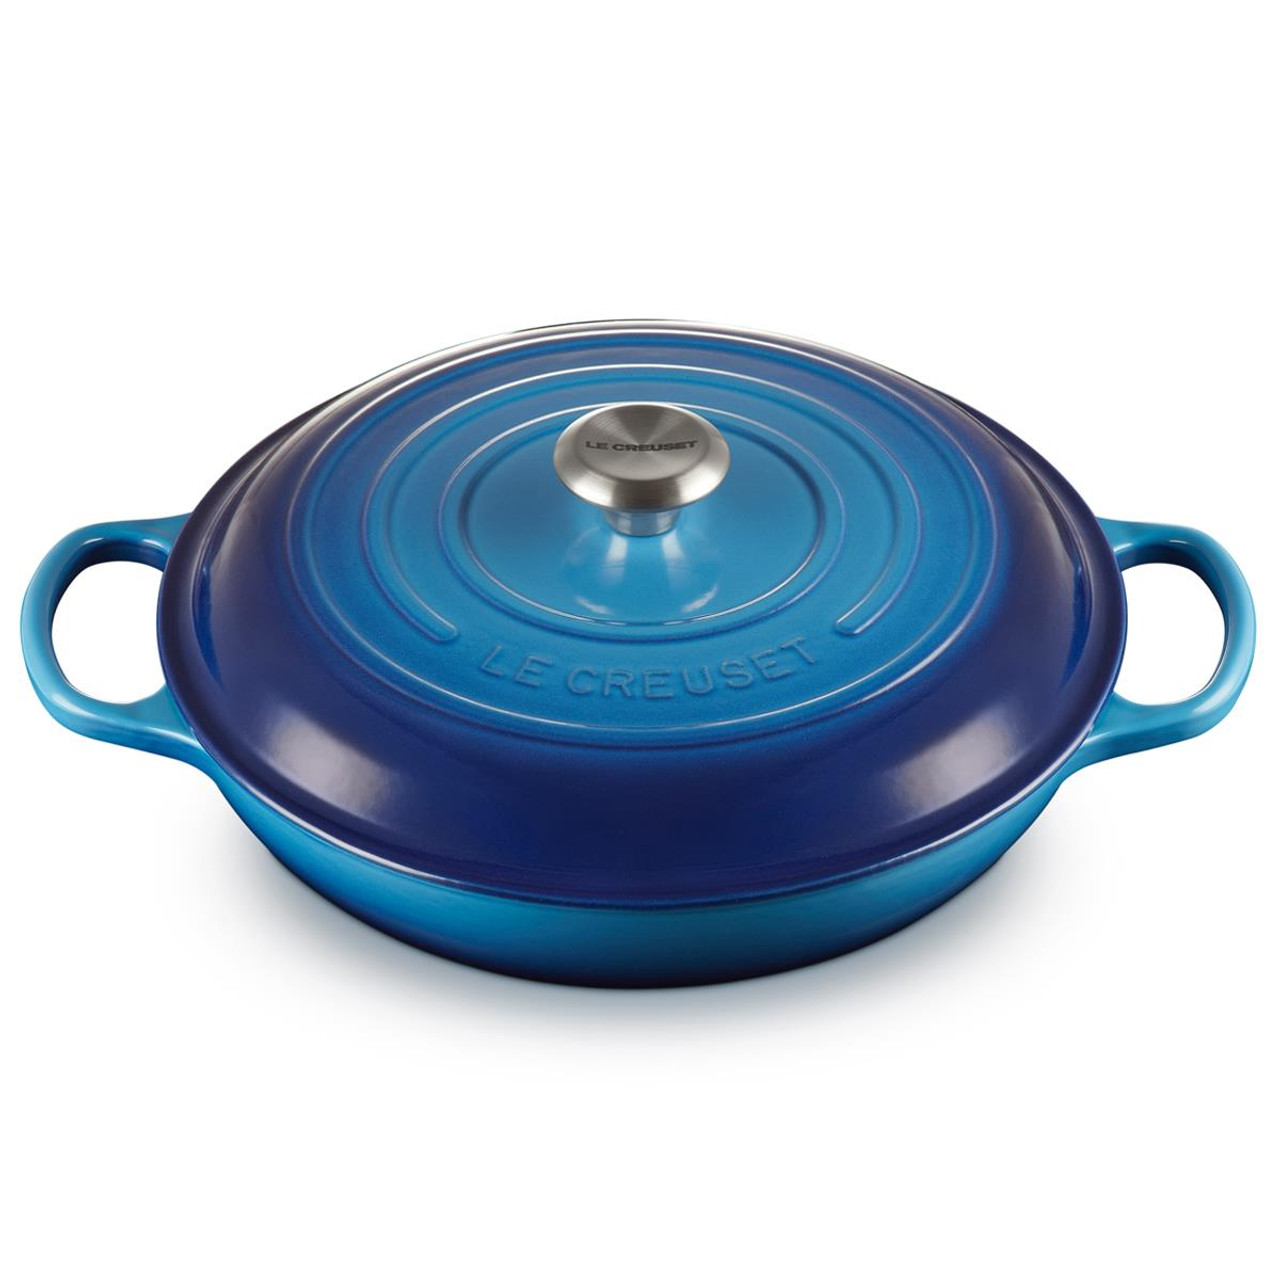 What are the hob cooking guidelines for the Le Creuset shallow casserole?